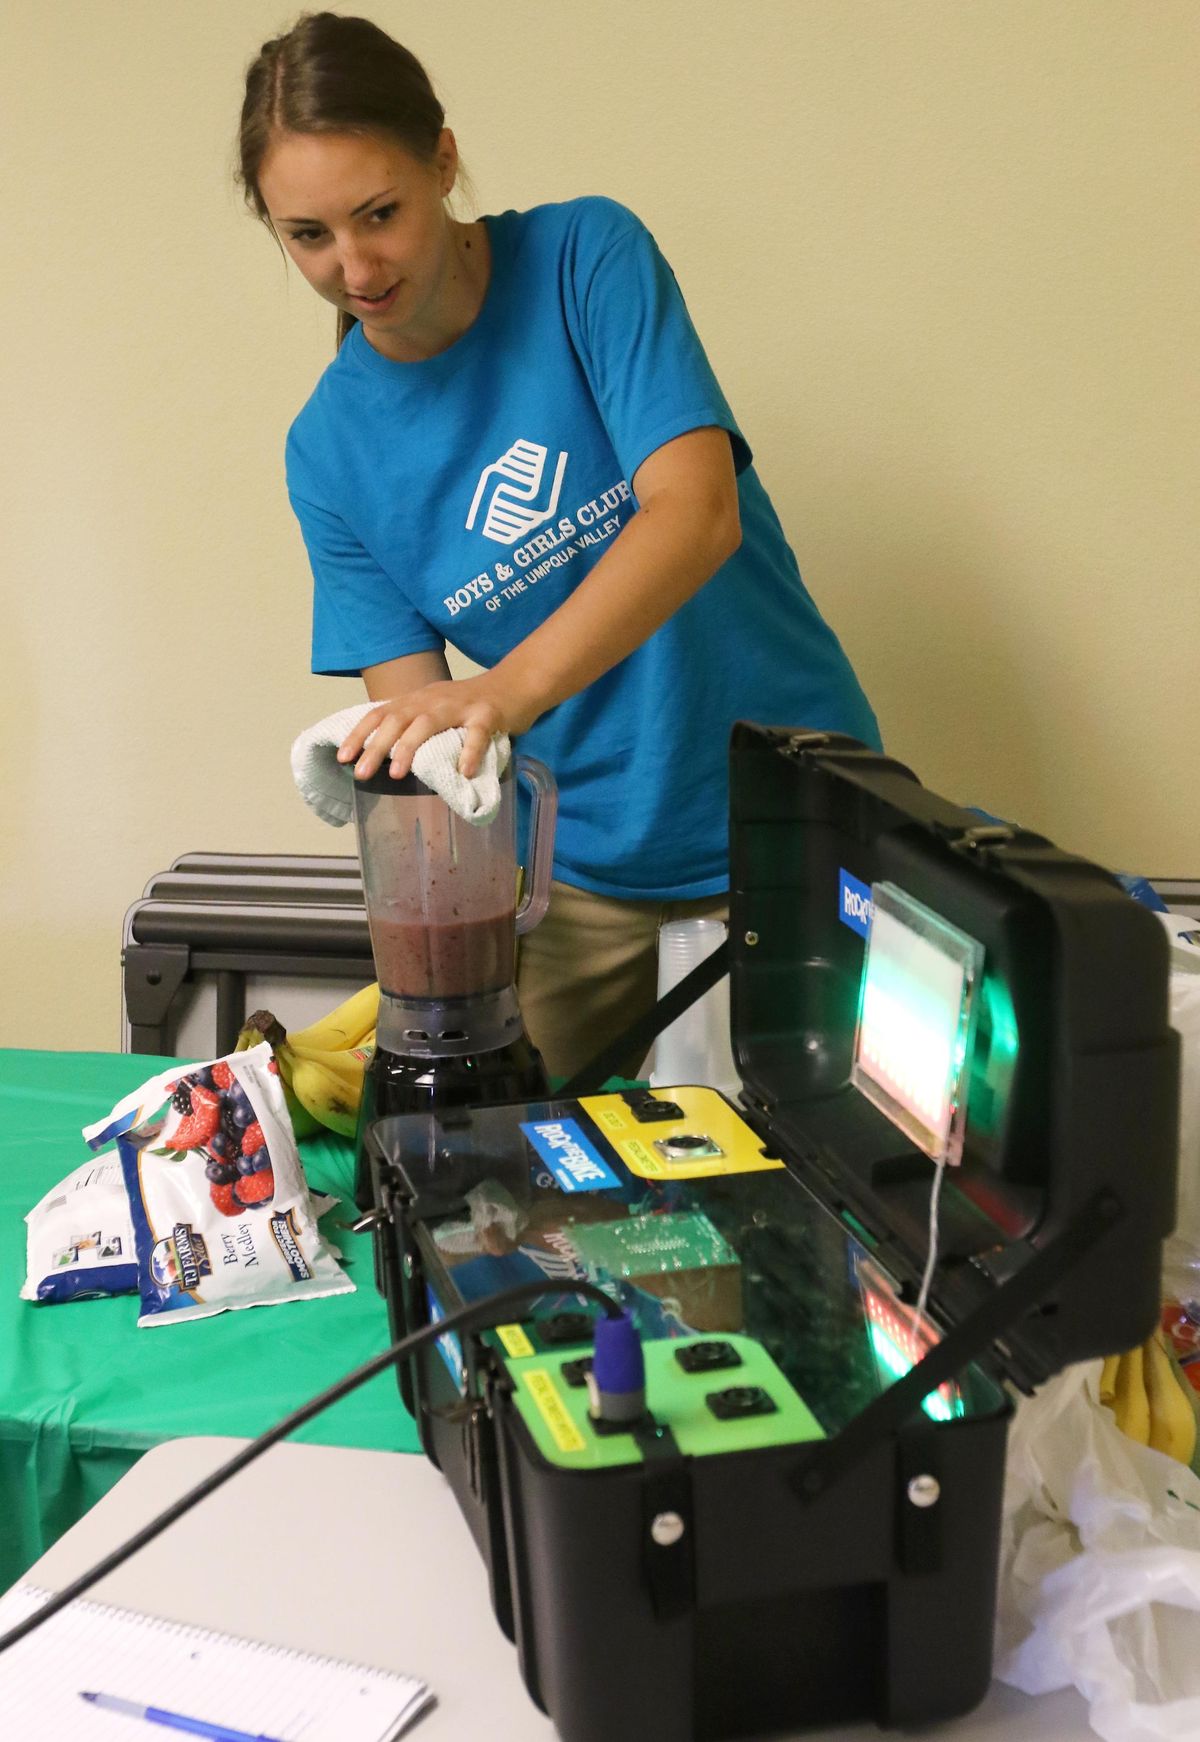 Staats makes healthy smoothies in a blender powered by children pedaling a stationary bike in Roseburg, Ore. (Michael Sullivan / Michael Sullivan The News-Review via the Associated Press)